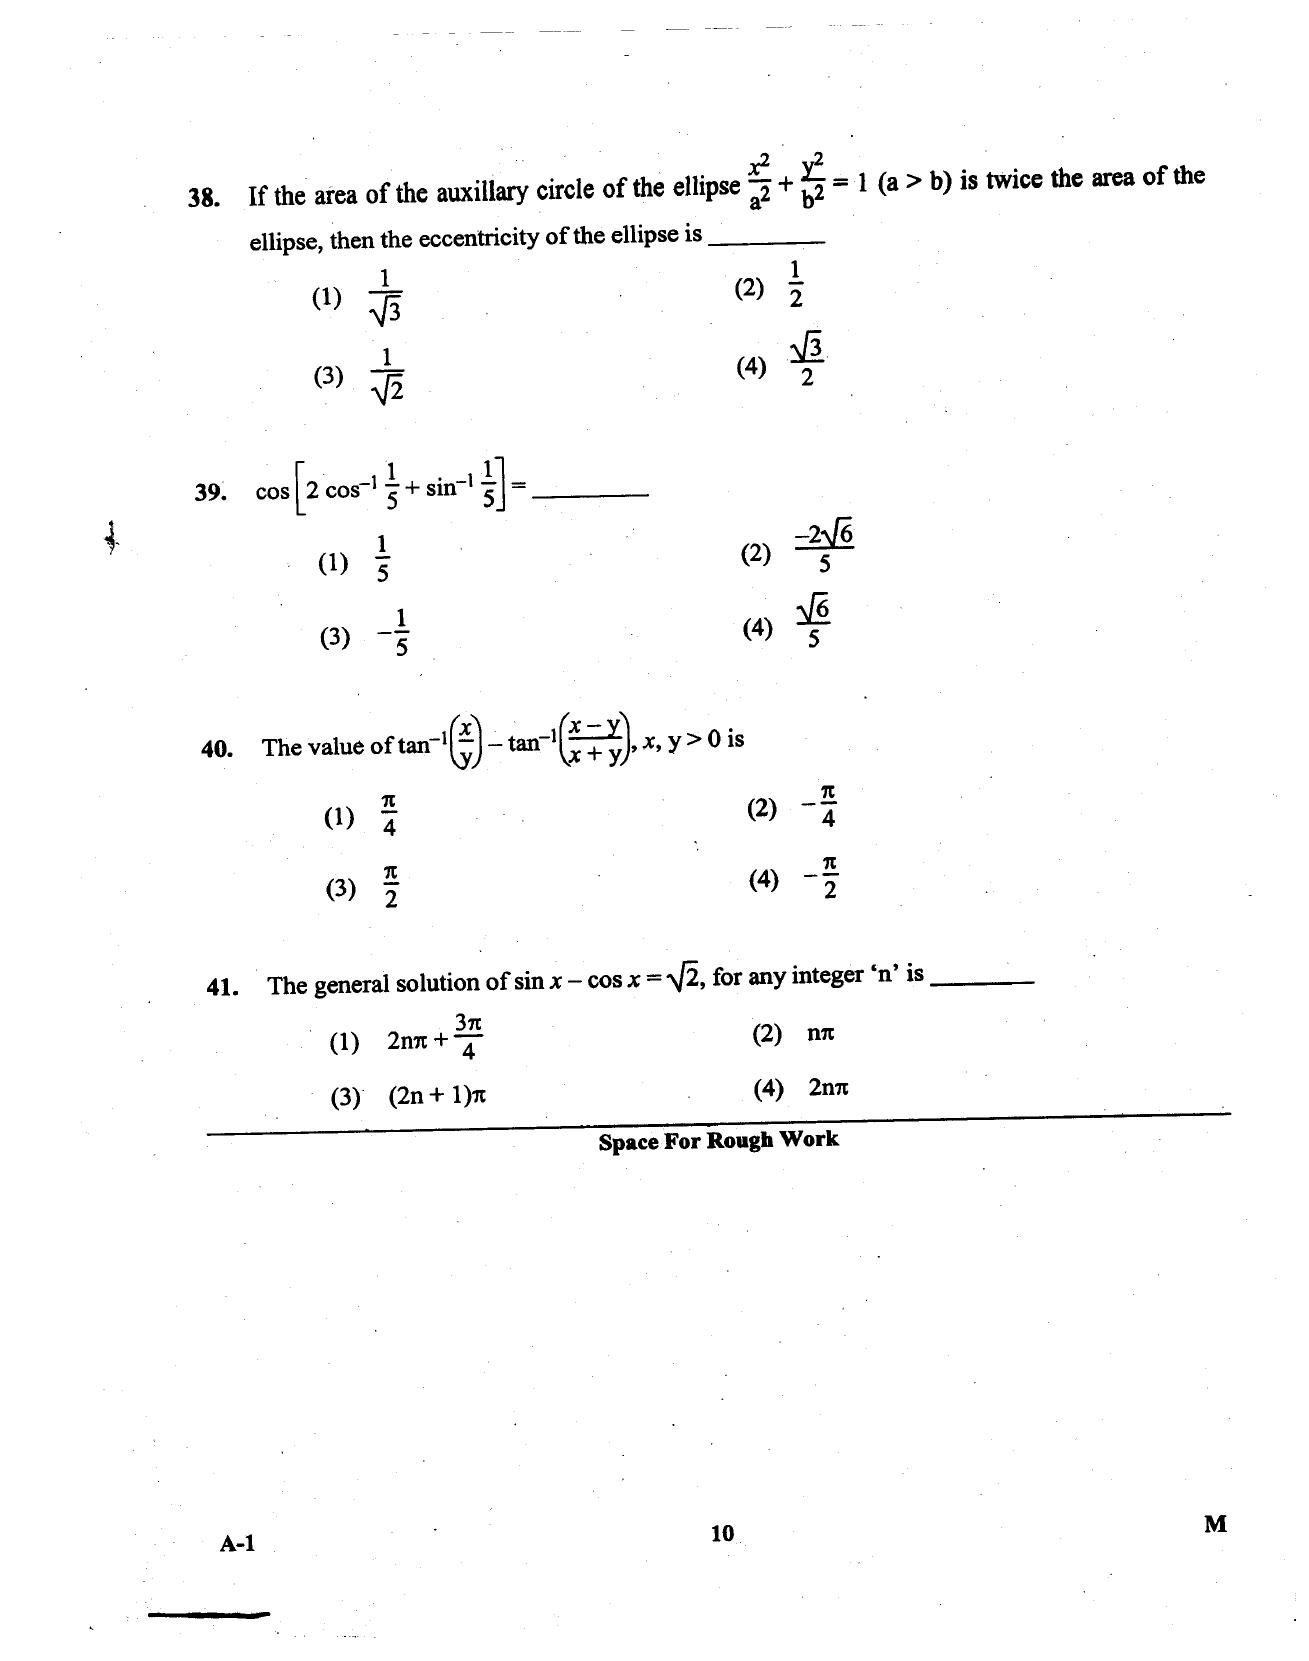 KCET Mathematics 2013 Question Papers - Page 10